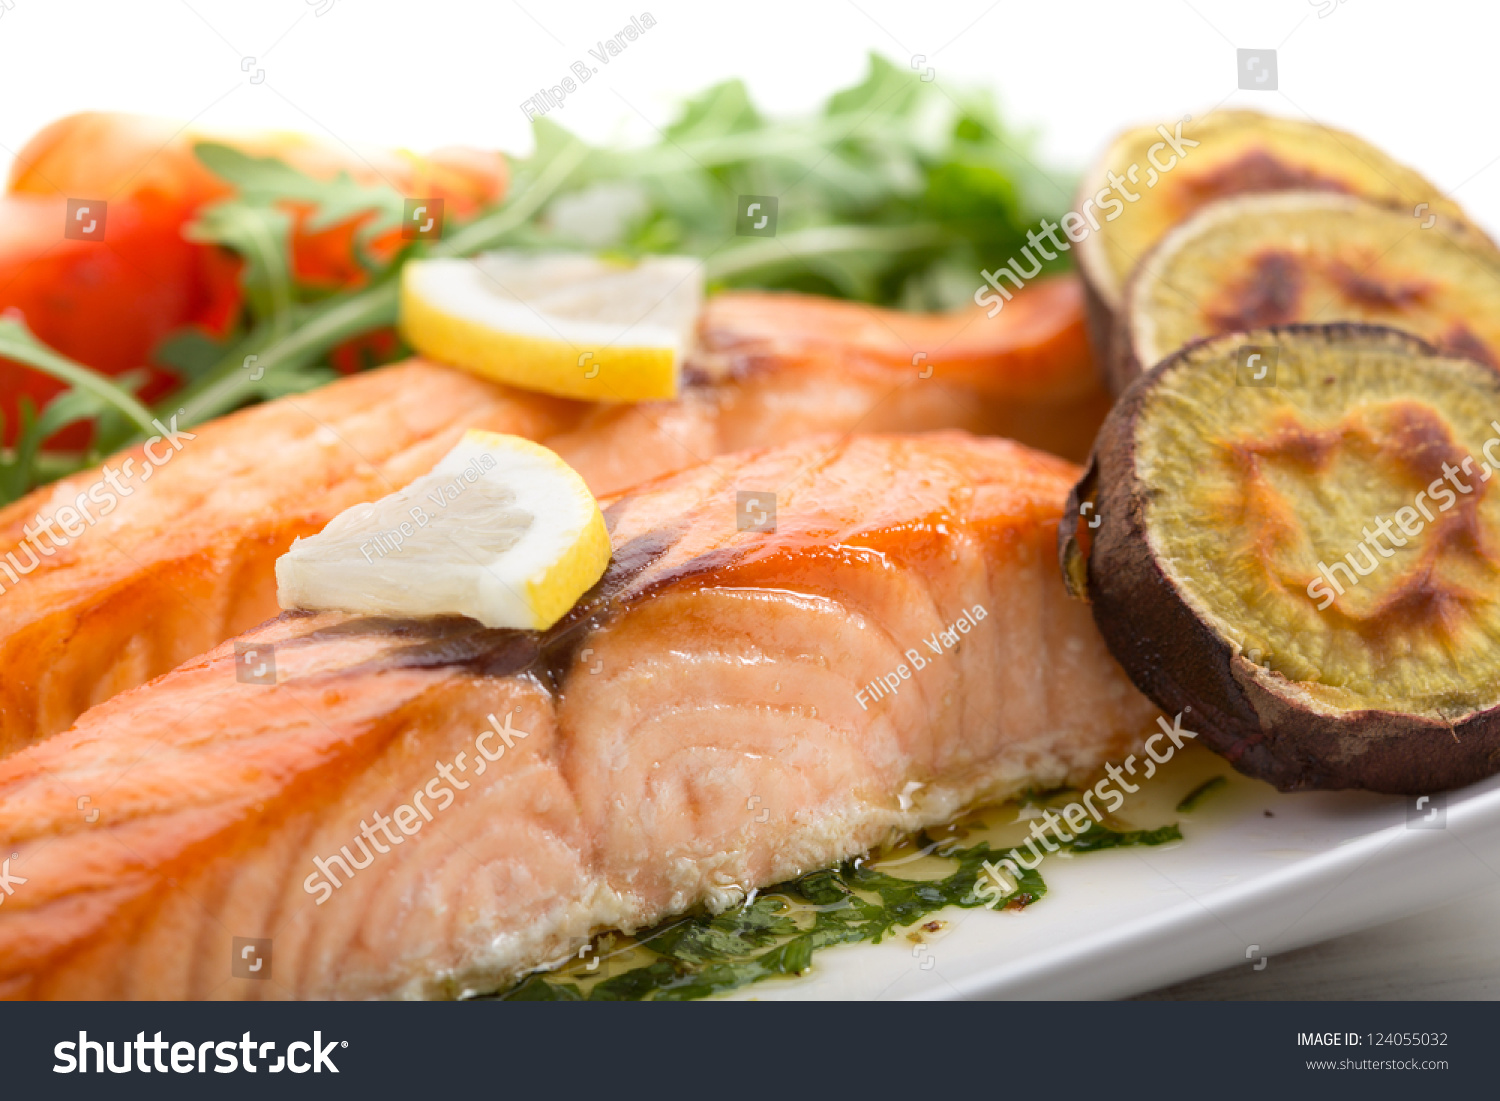 Roasted Salmon Fillets With Sweet Potatoes Stock Photo 124055032 ...